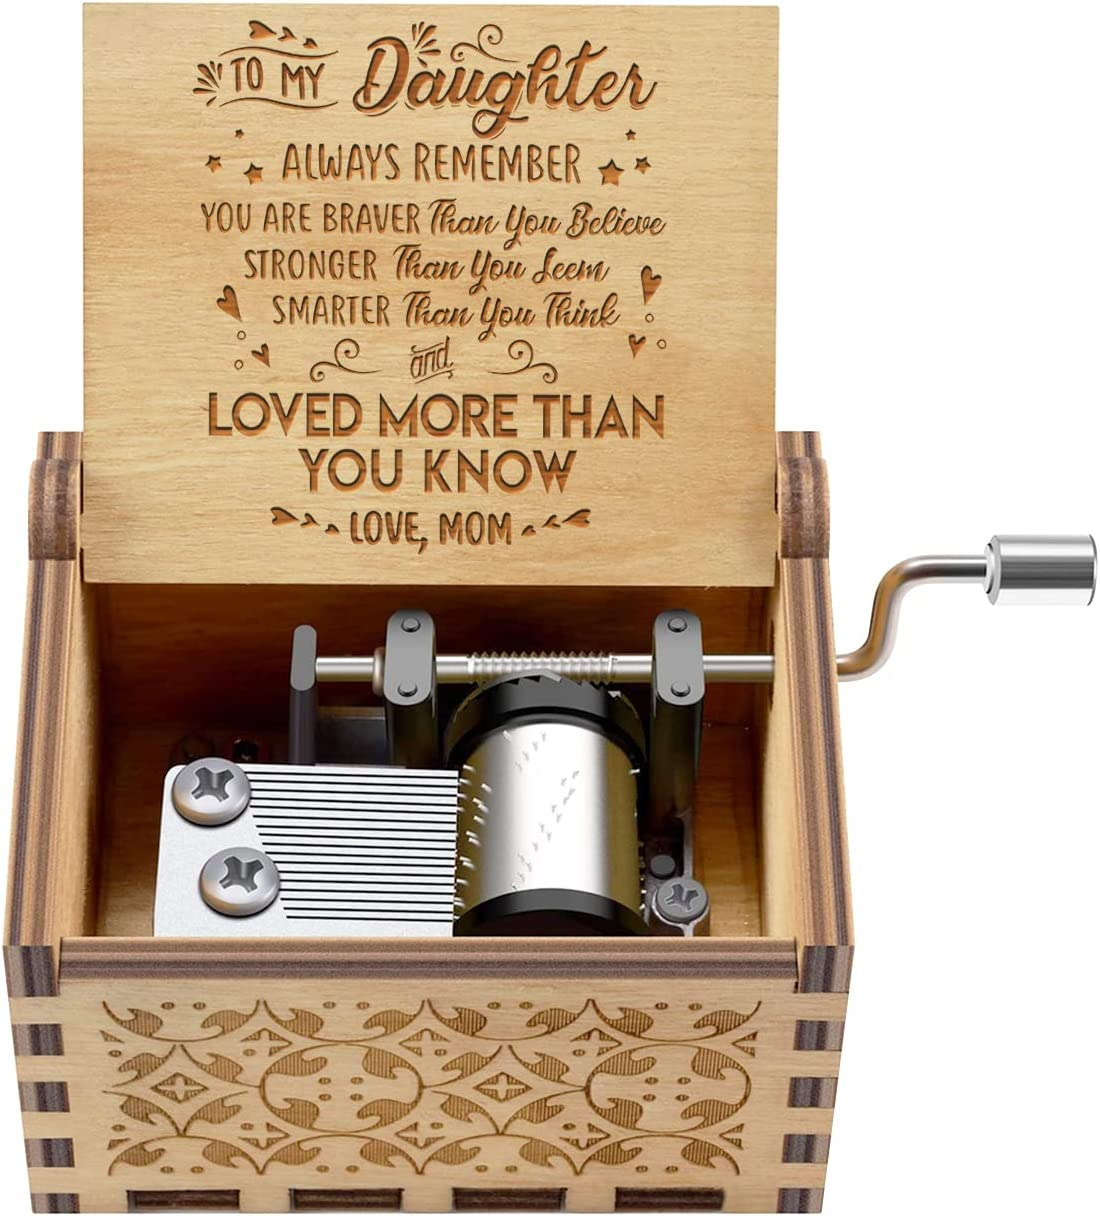 Engraved Color Music Box - Gift for Daughter from Mom - Don T Be Afraid of Being Different (Mb-370-Momdau) Christmas Gift Ideas for Her